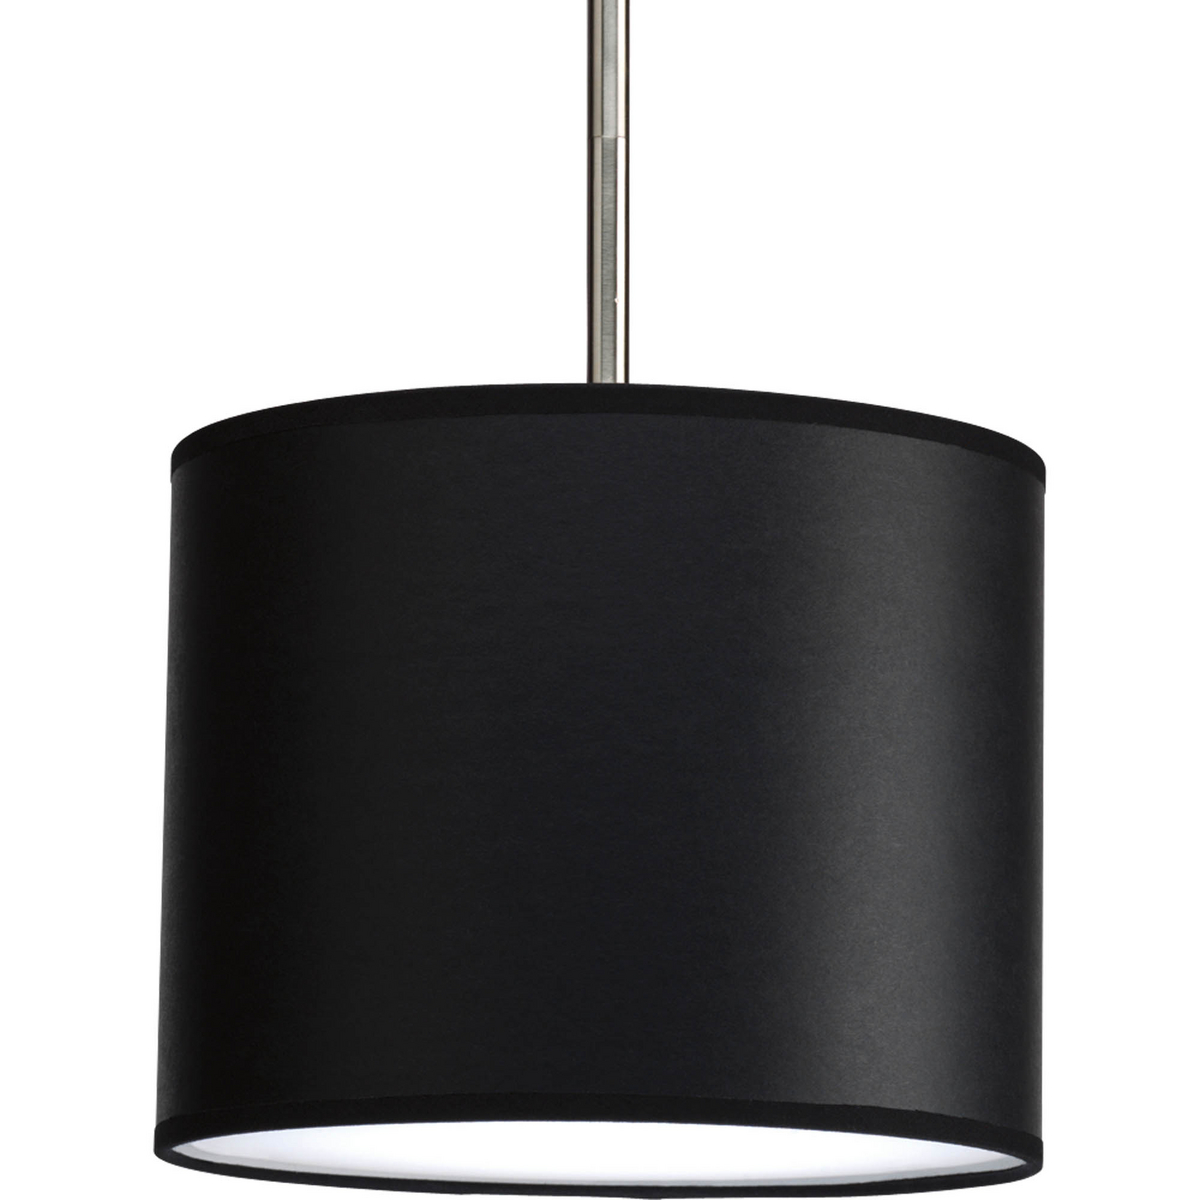 The Markor Series is a modular pendant system. The versatile series allow the choice of shades and stem kits. This 10 in shade with Black Parchment Paper is inspired by mid-century design. Acrylic bottom diffuser. This shade can be used with a variety of stem kits in CFL, LED and incandescent light sources. (Cannot be used with 3-light pendant kits.).